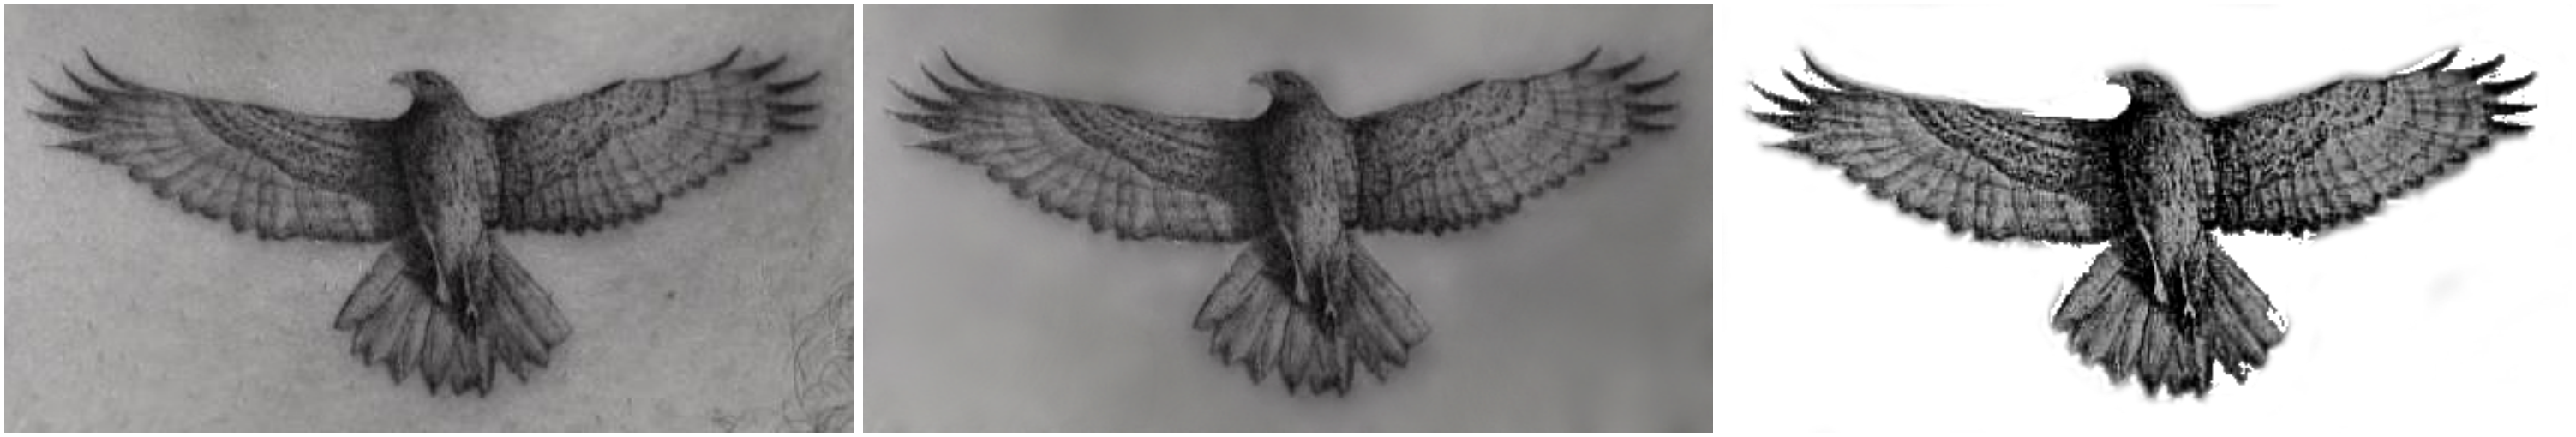 Three progress images of the New Zealand hawk tattoo on Taika Waititi's chest where I'm trying to isolate the hawk's design.